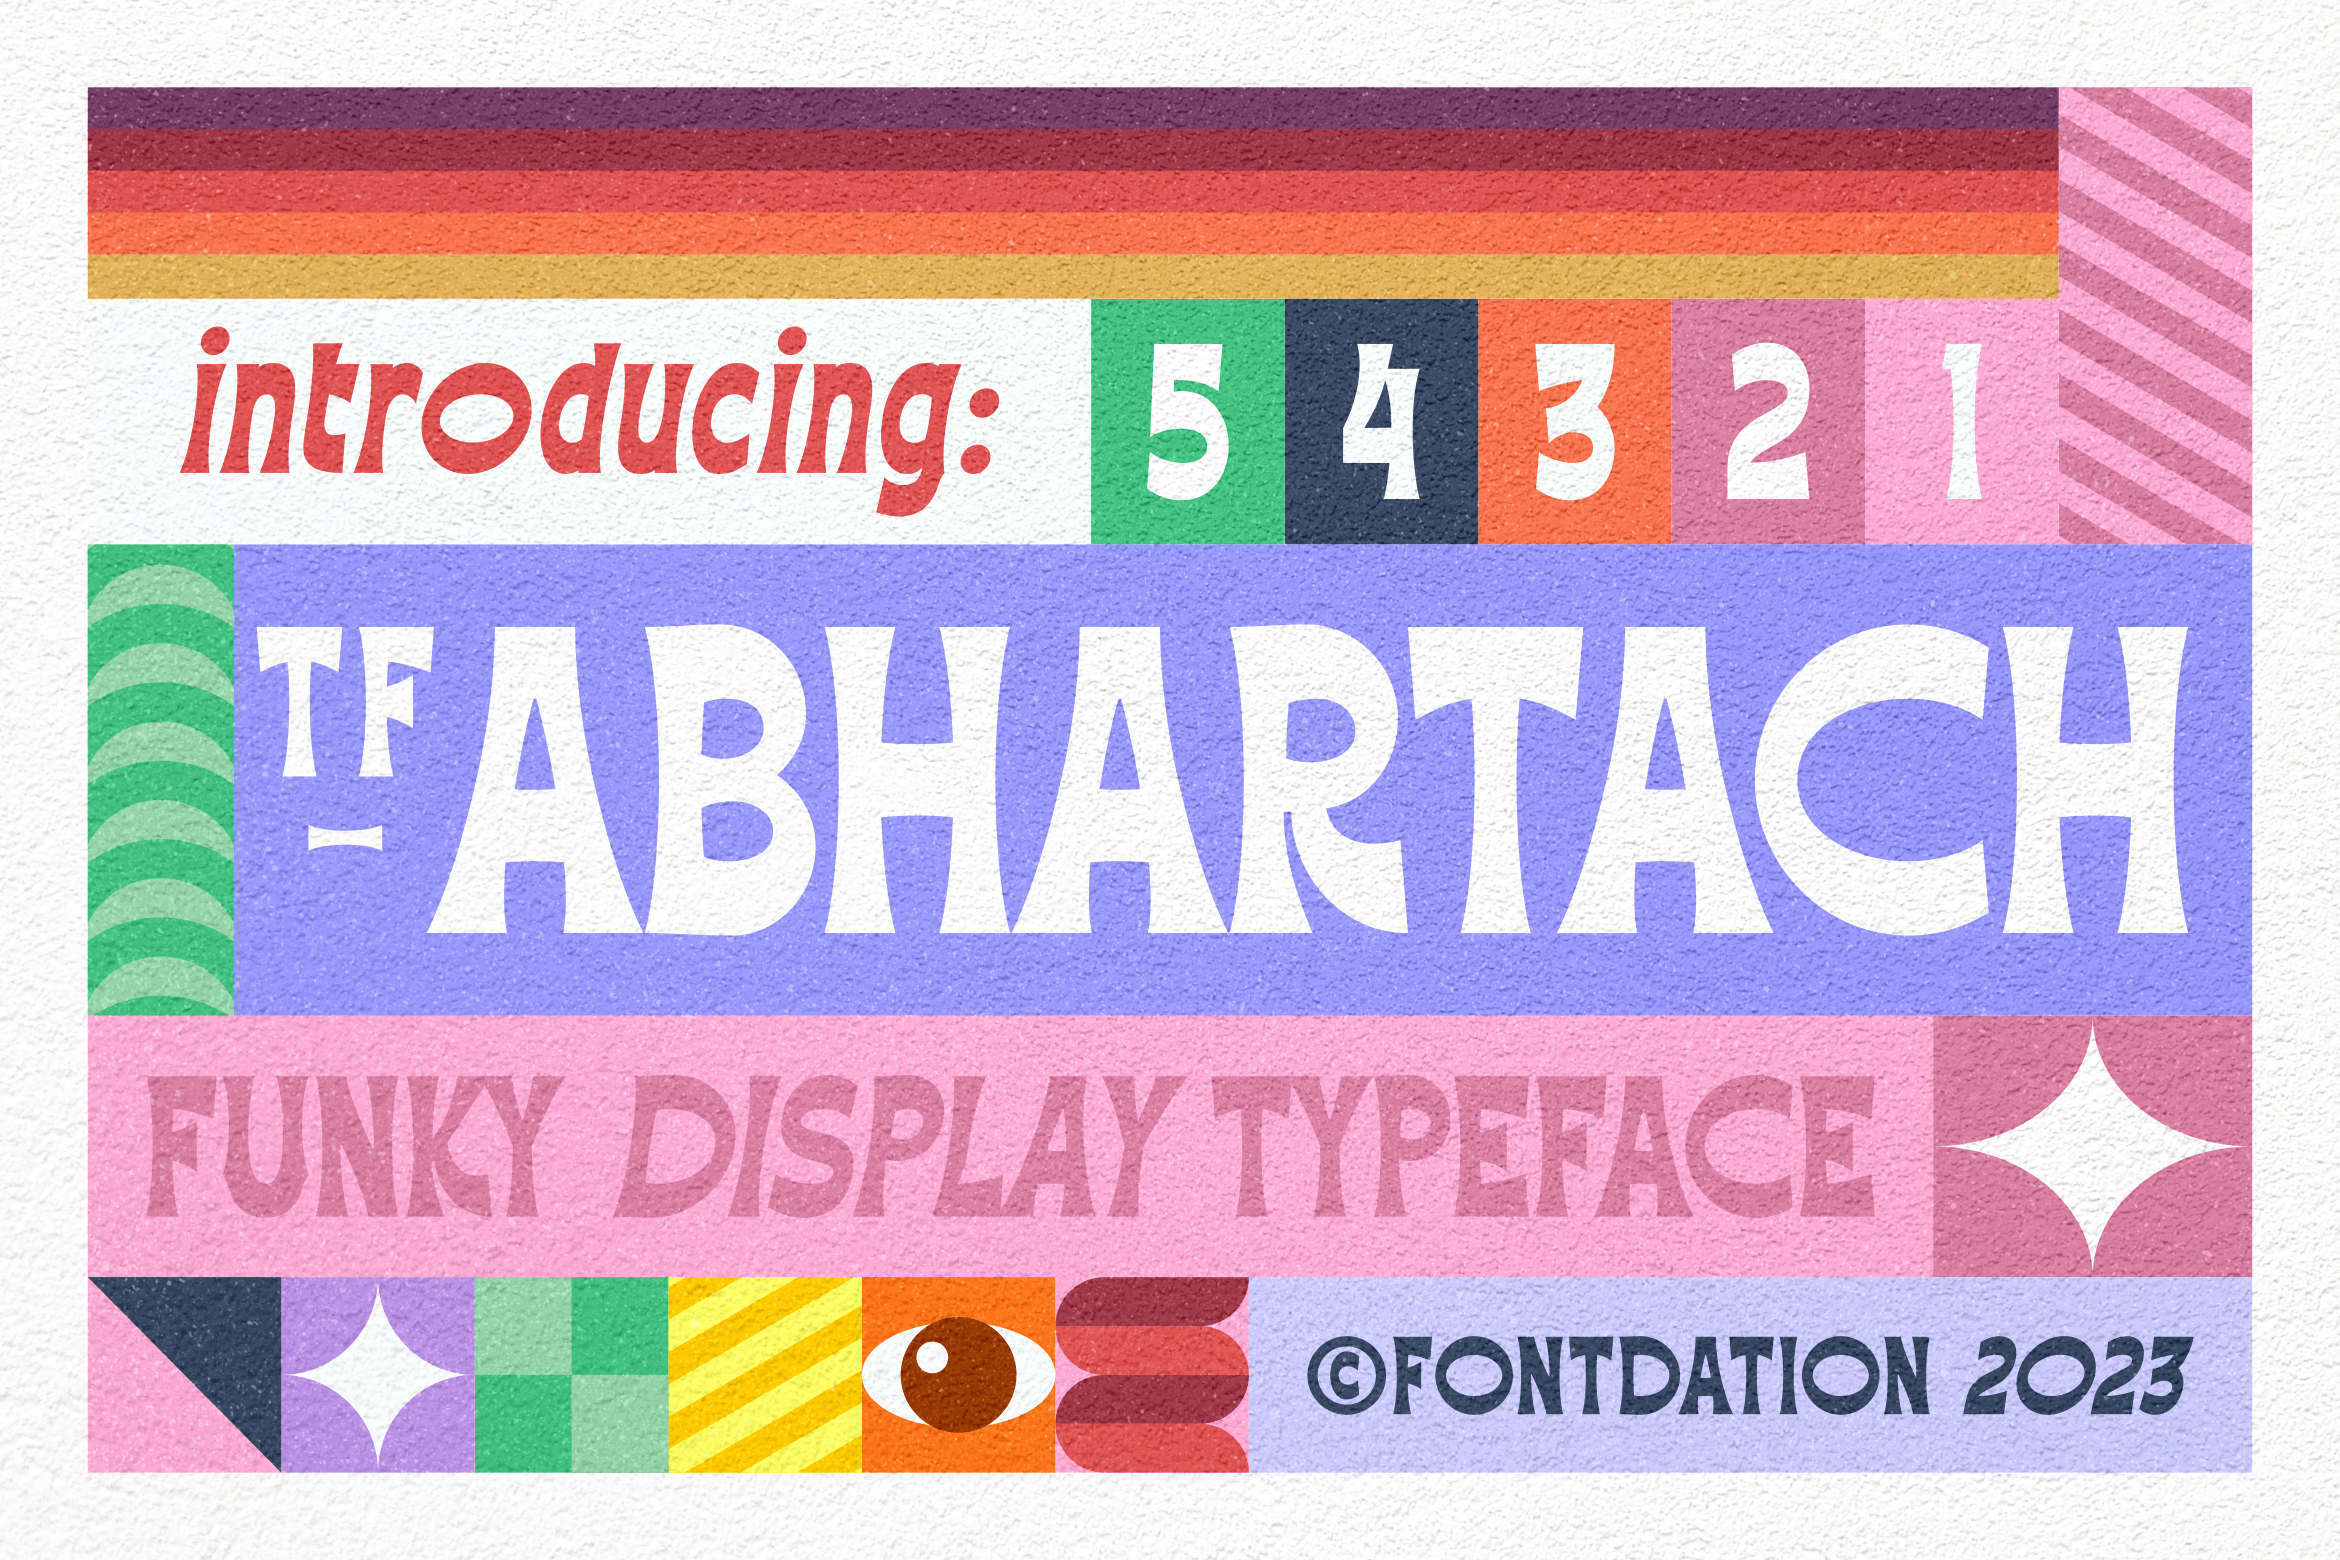 TF-Abhartach Italic Font preview